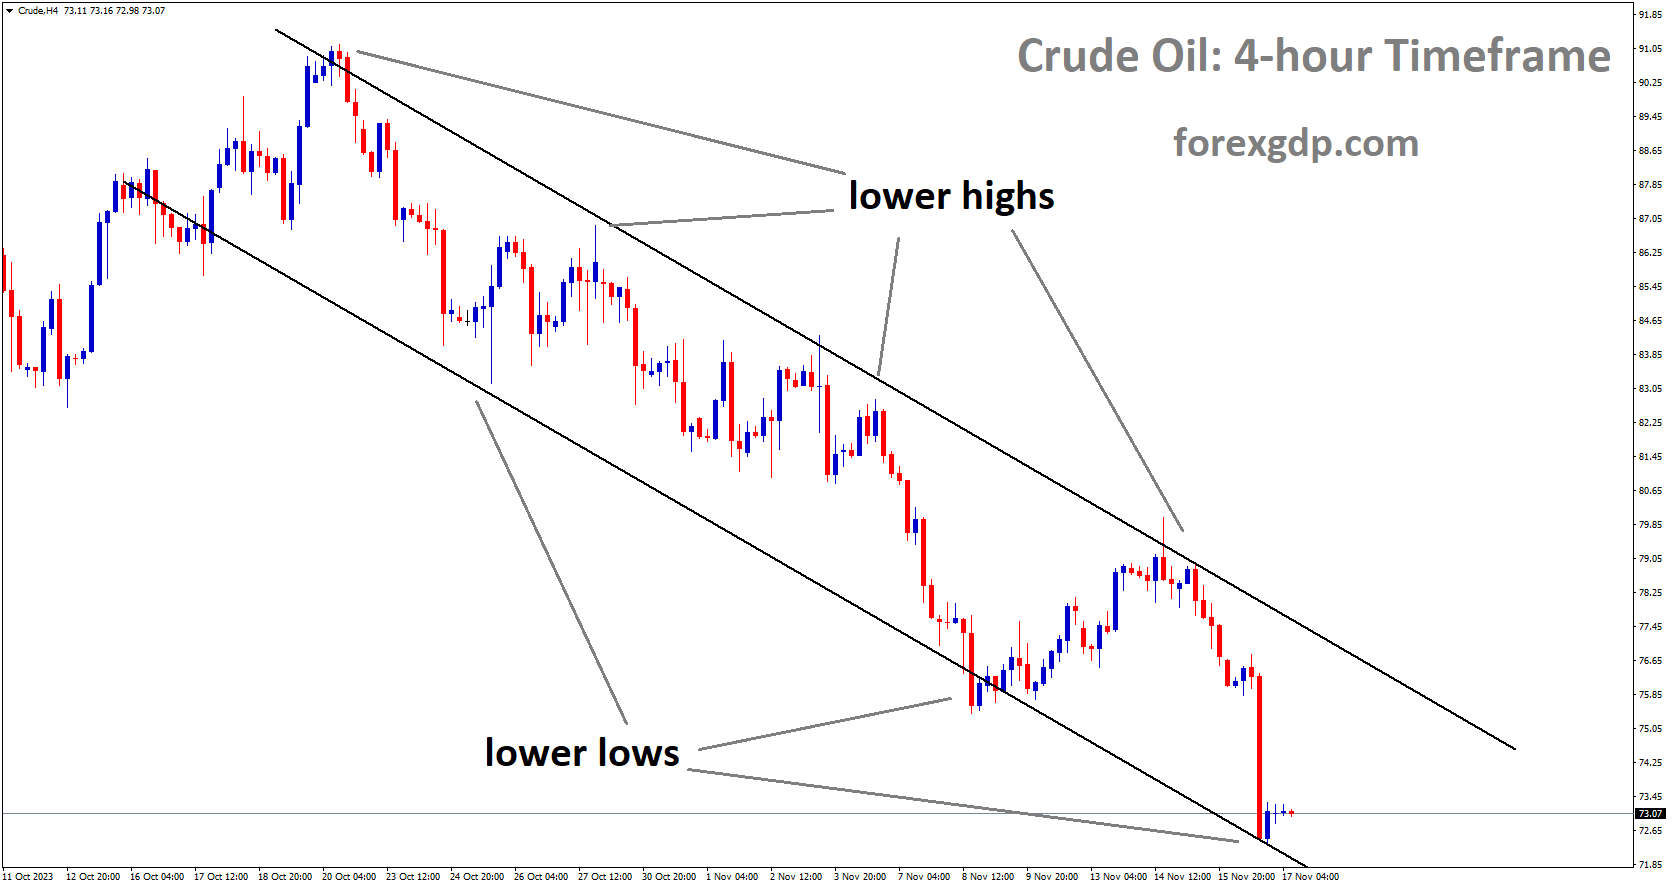 Crude Oil is moving in Descending channel and the market has reached the lower low area of the pattern